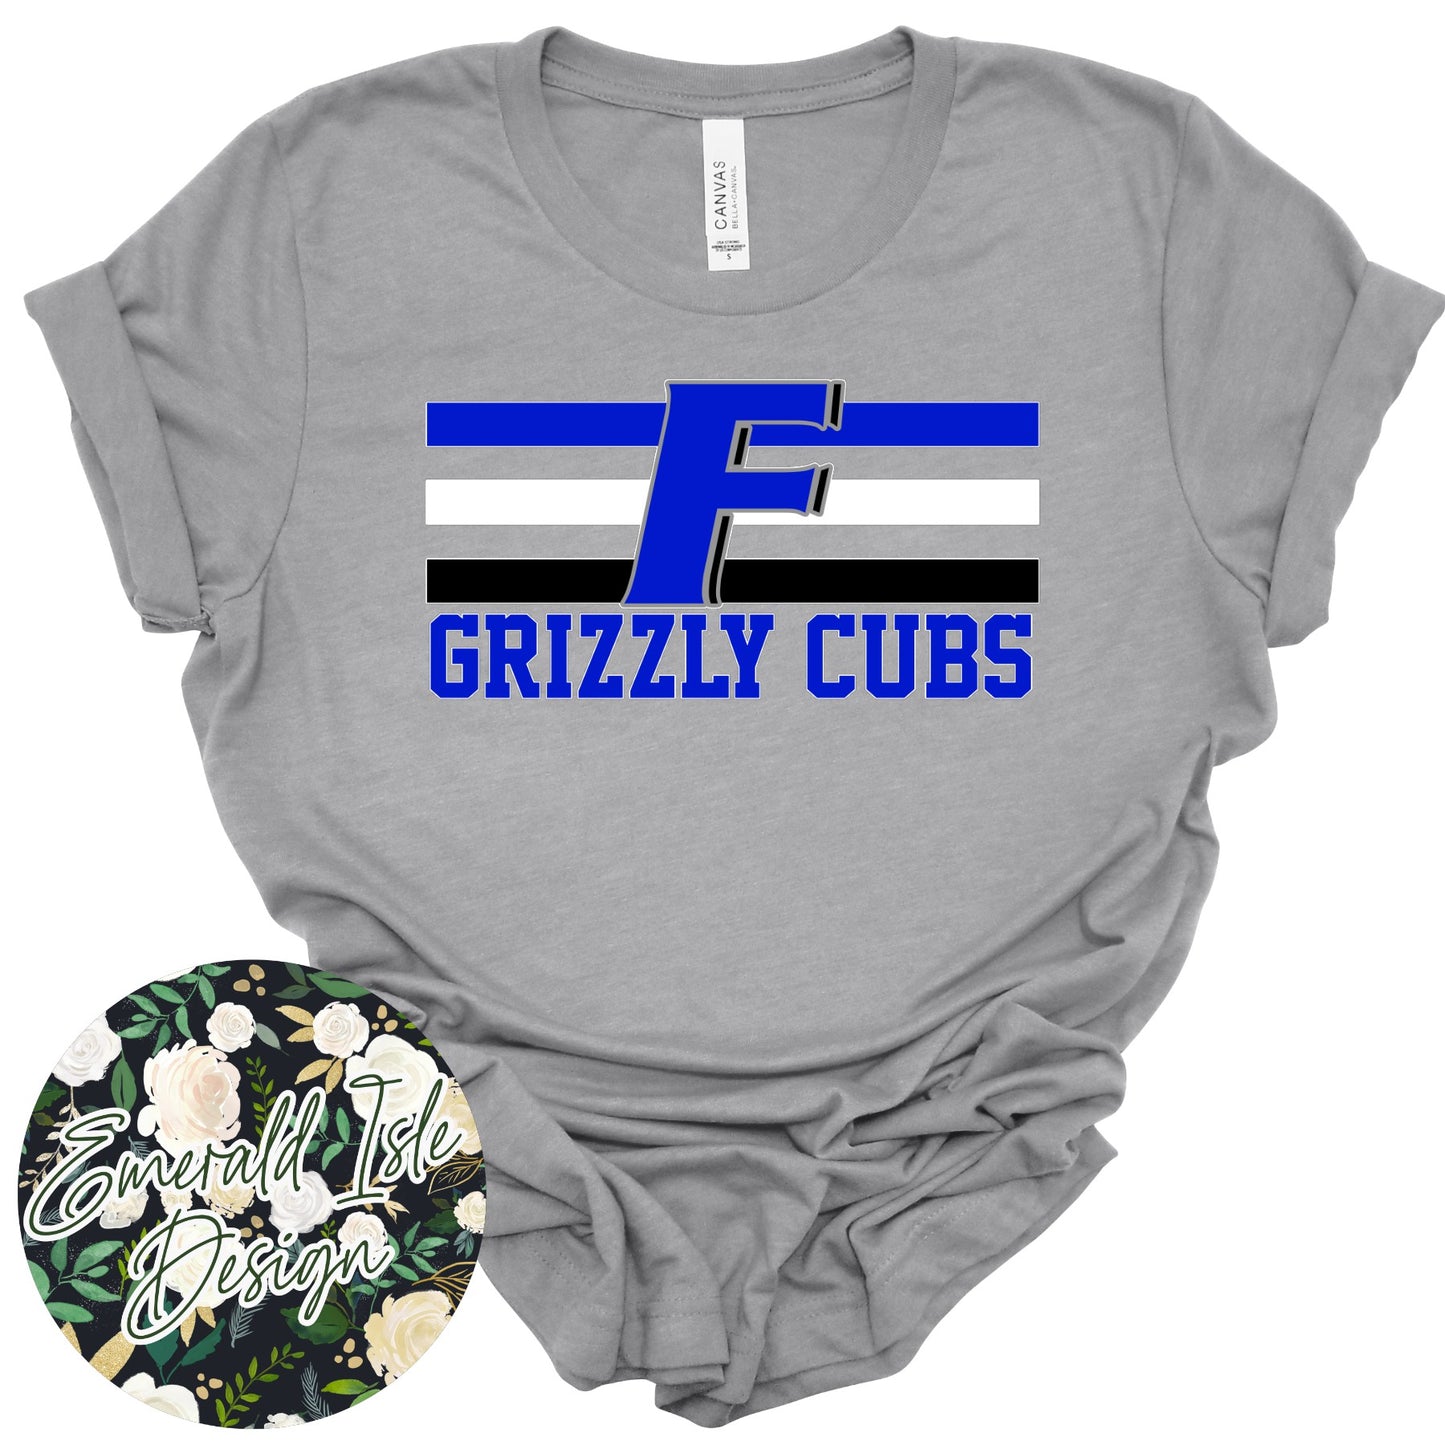 Grizzly Cubs Stripes Design